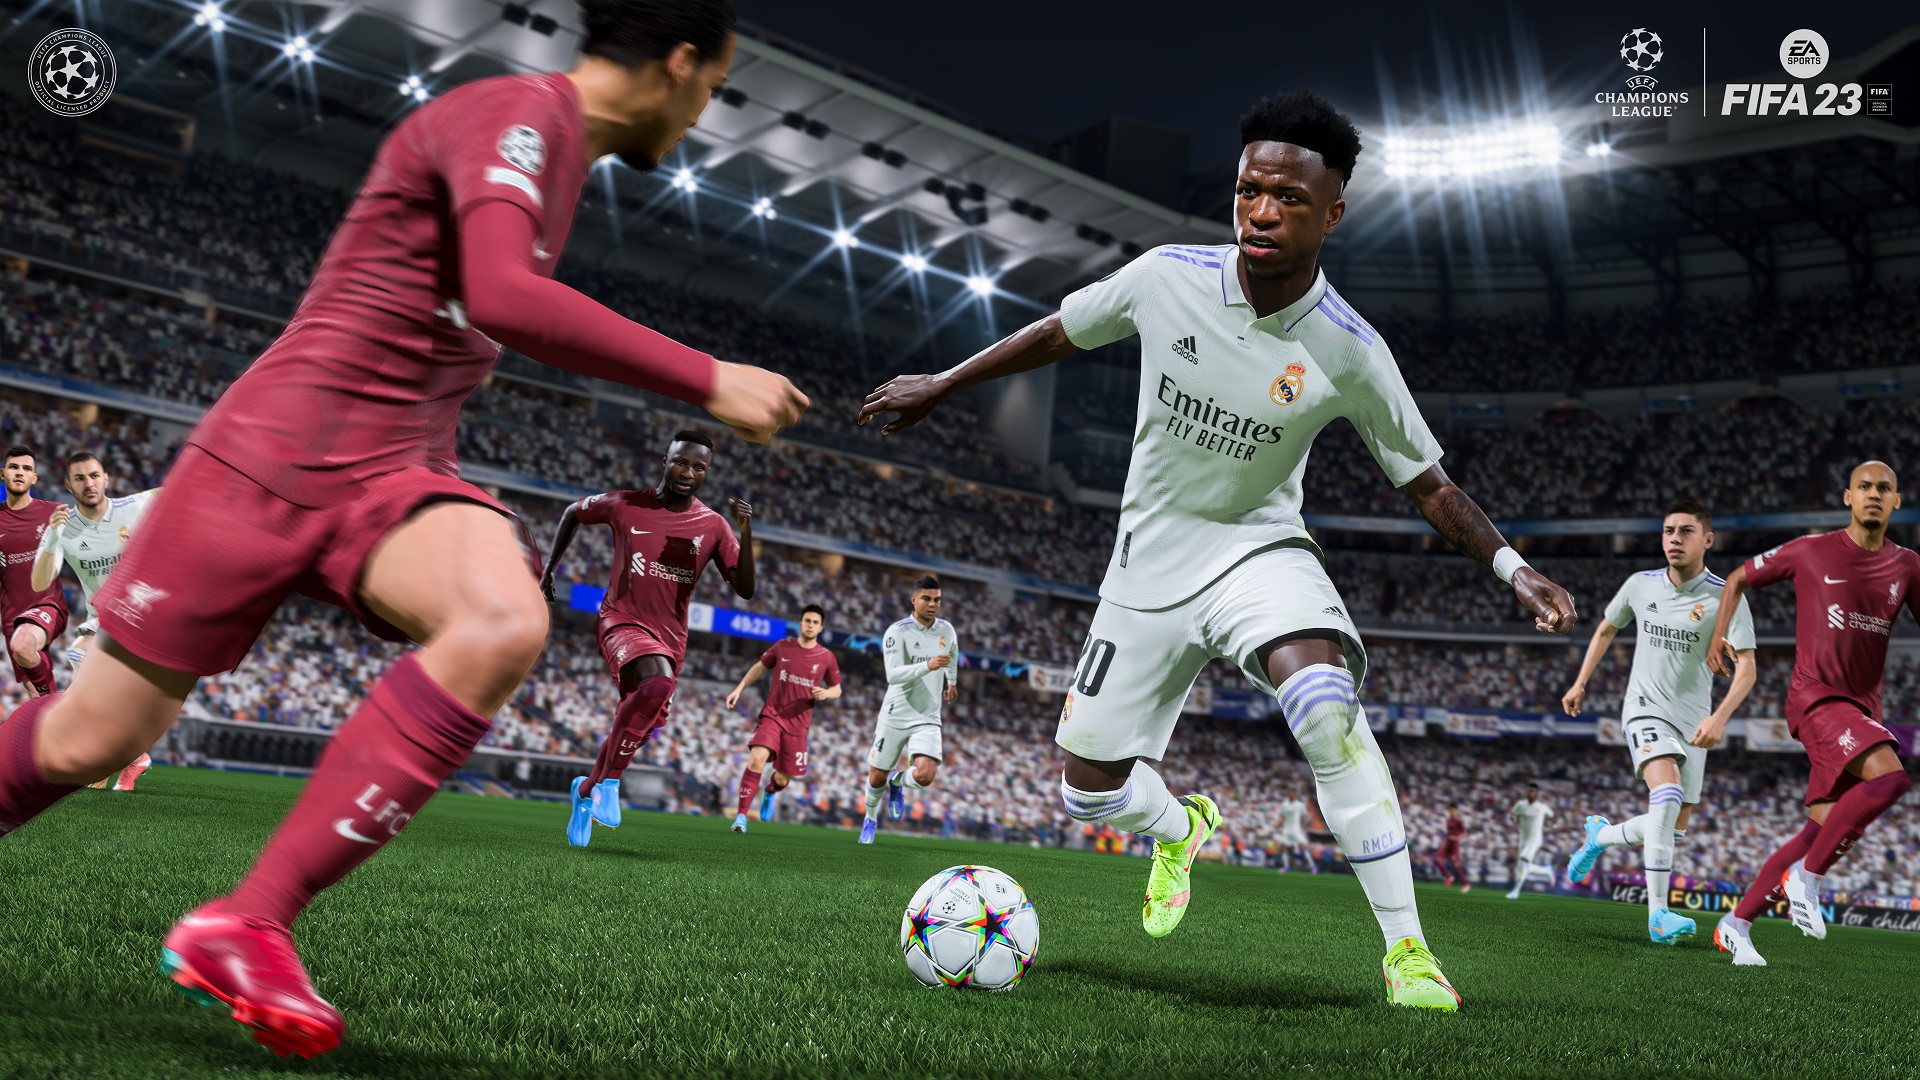 FIFA MOBILE 23 OFFICIAL GAMEPLAY & TRAILER! EVERY FIFA MOBILE 23 FEATURES! FIFA  MOBILE 23 TRAILER! 